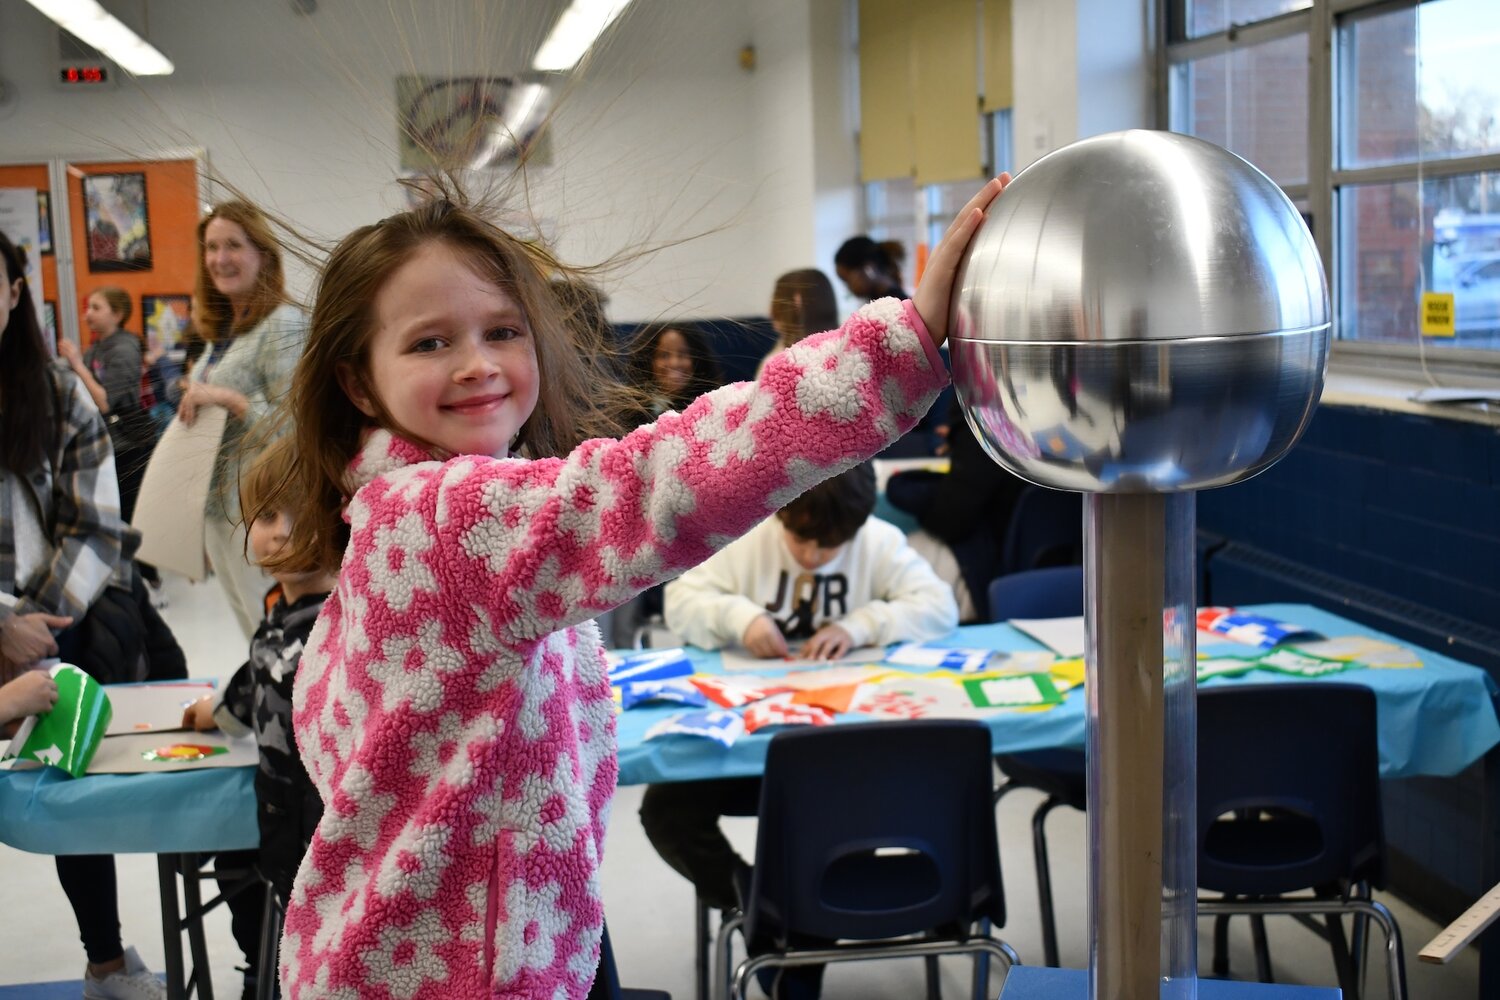 STEM night brings Malverne students together to celebrate science | Herald Community Newspapers